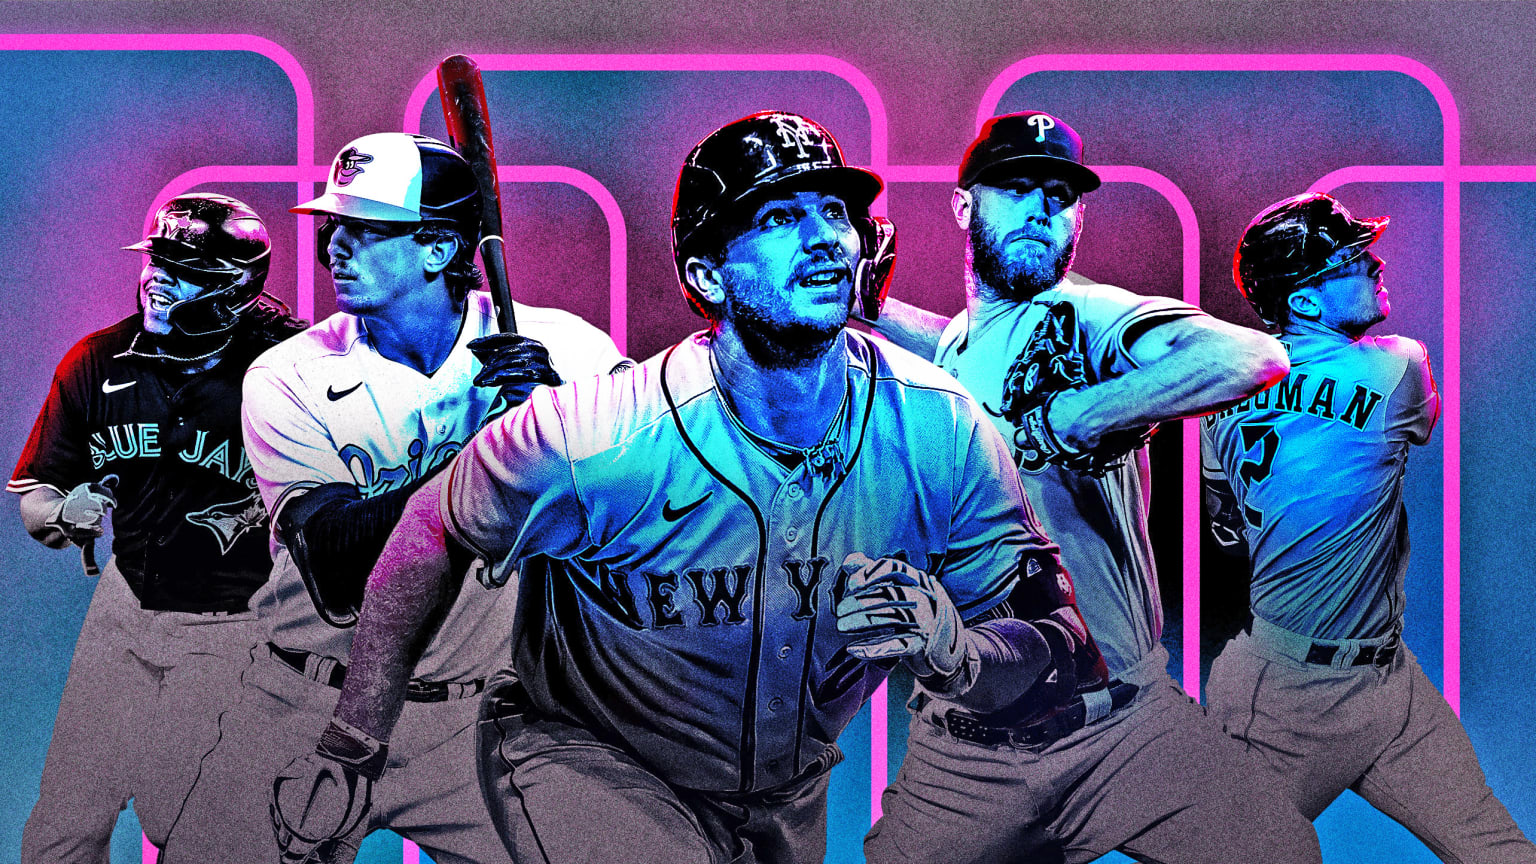 Image with blue and pink background featuring Vladimir Guerrero Jr., Adley Rutschman, Pete Alonso, Zack Wheeler and Alex Bregman